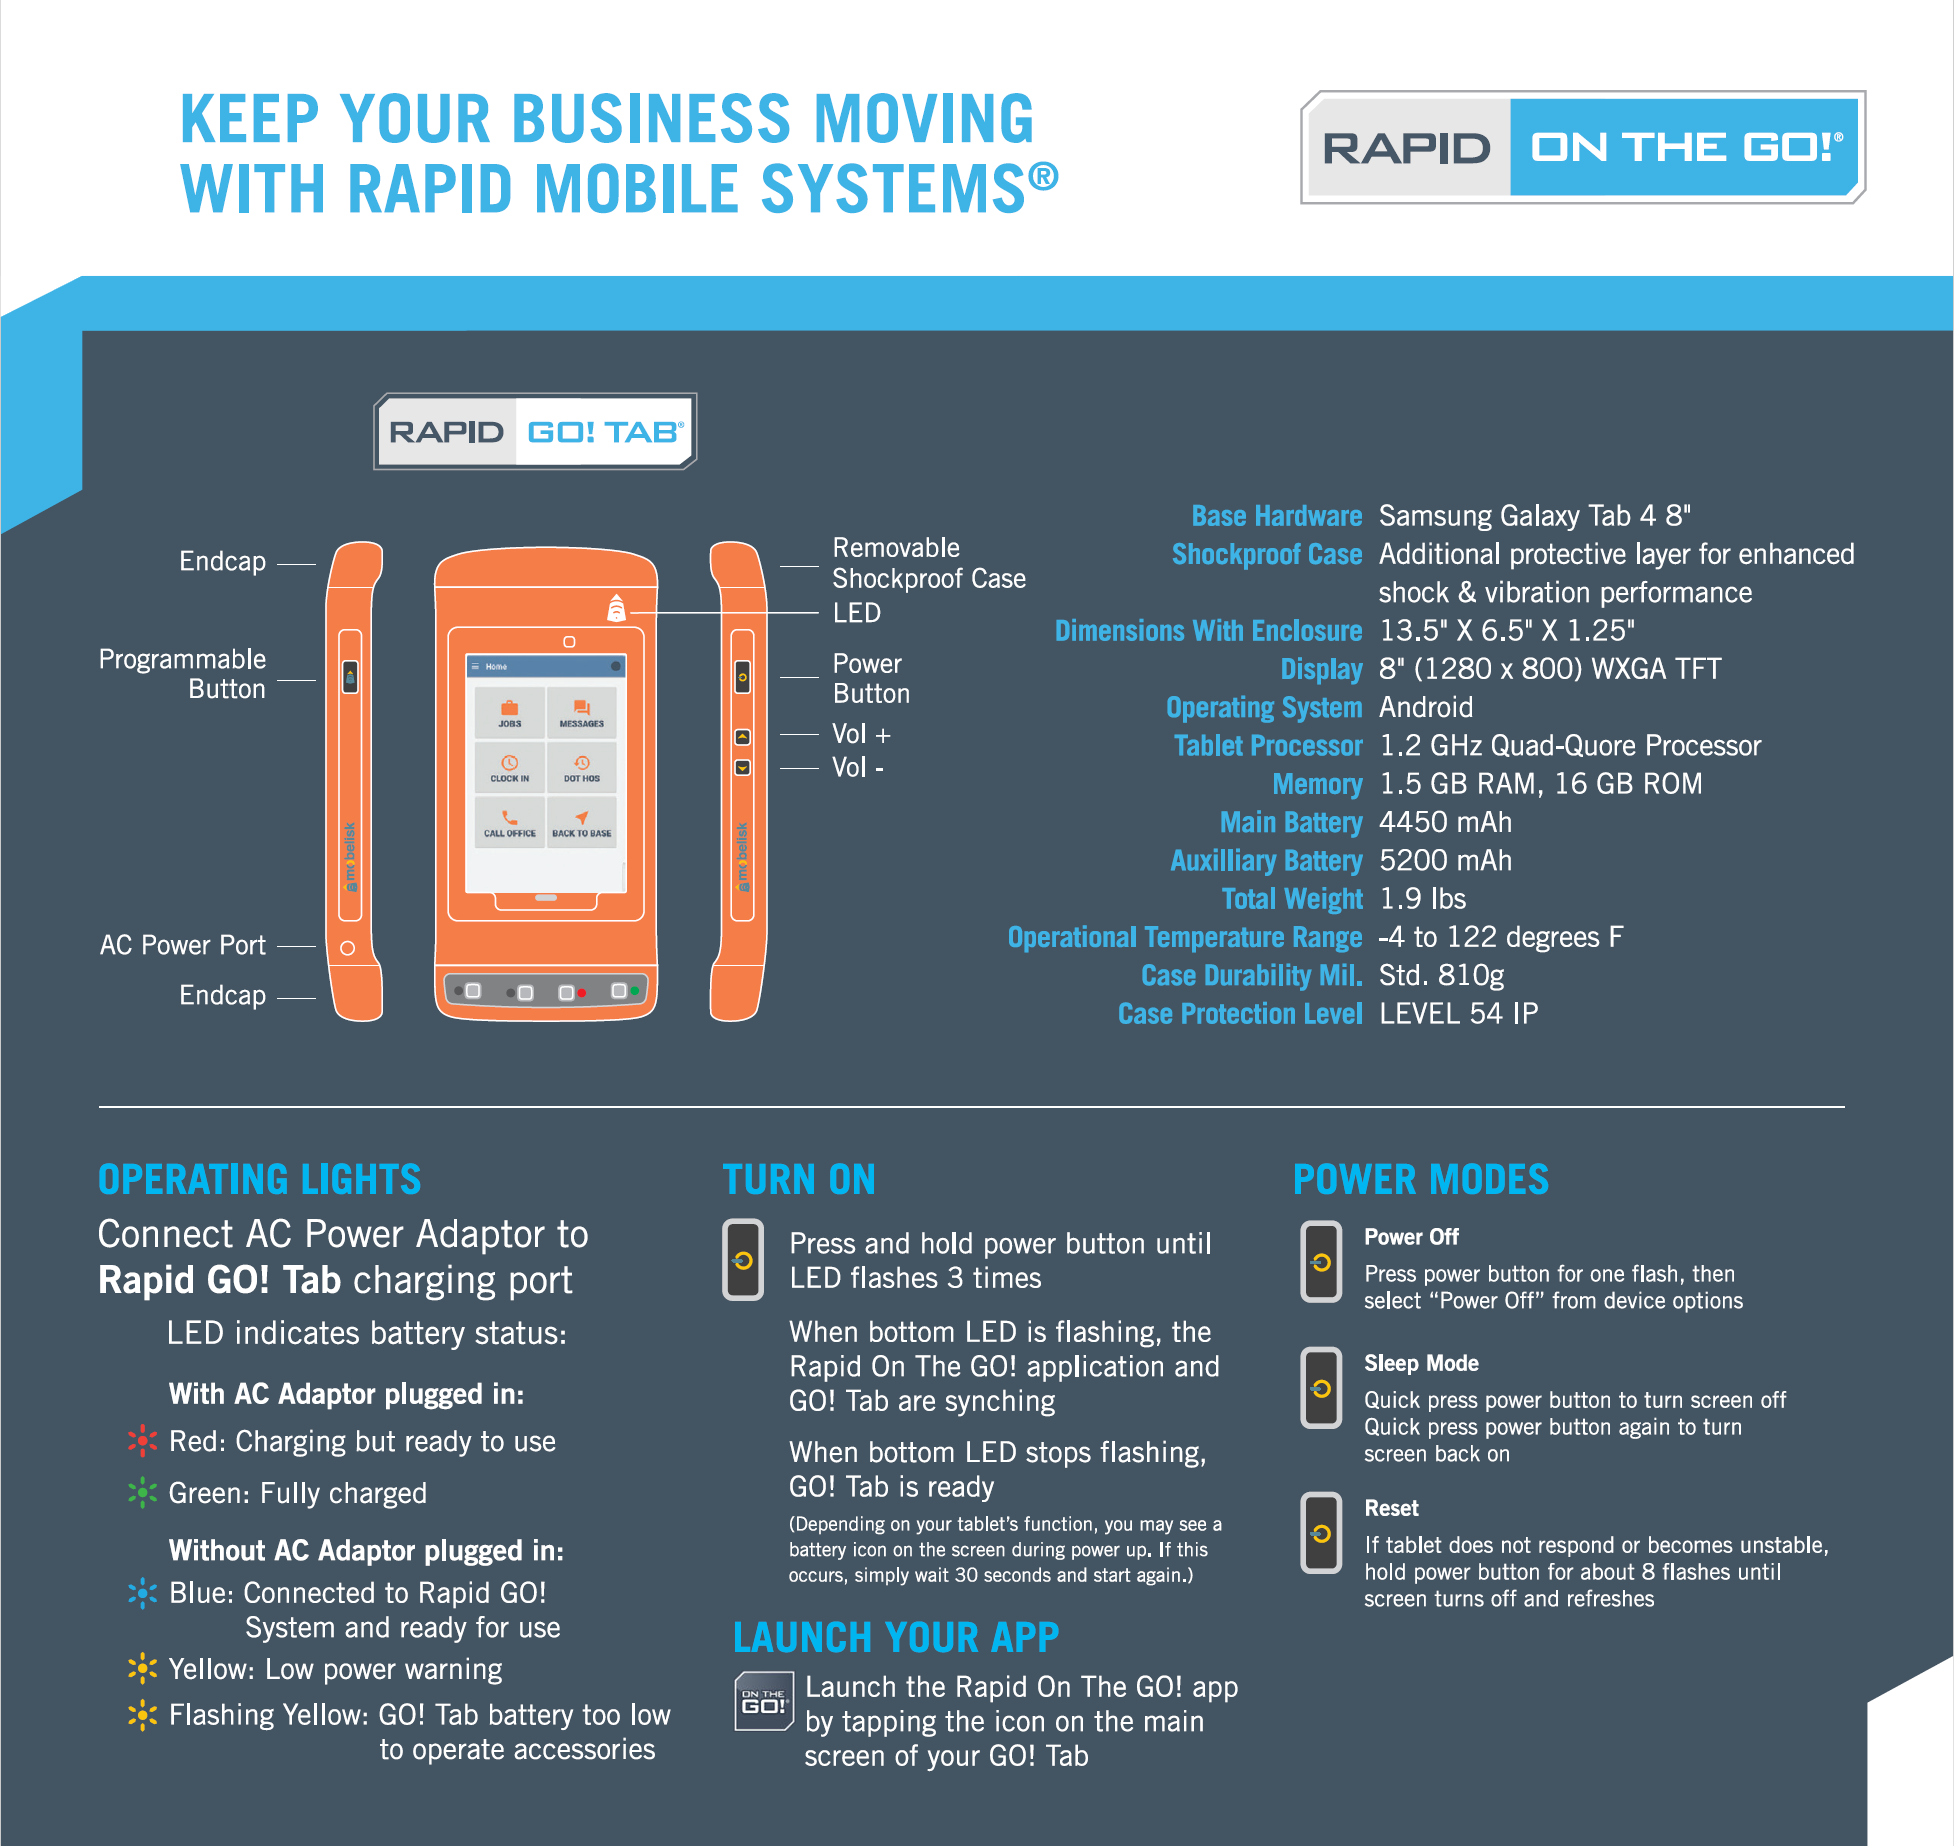 Rapid On The Go! - Keep Your Business Moving